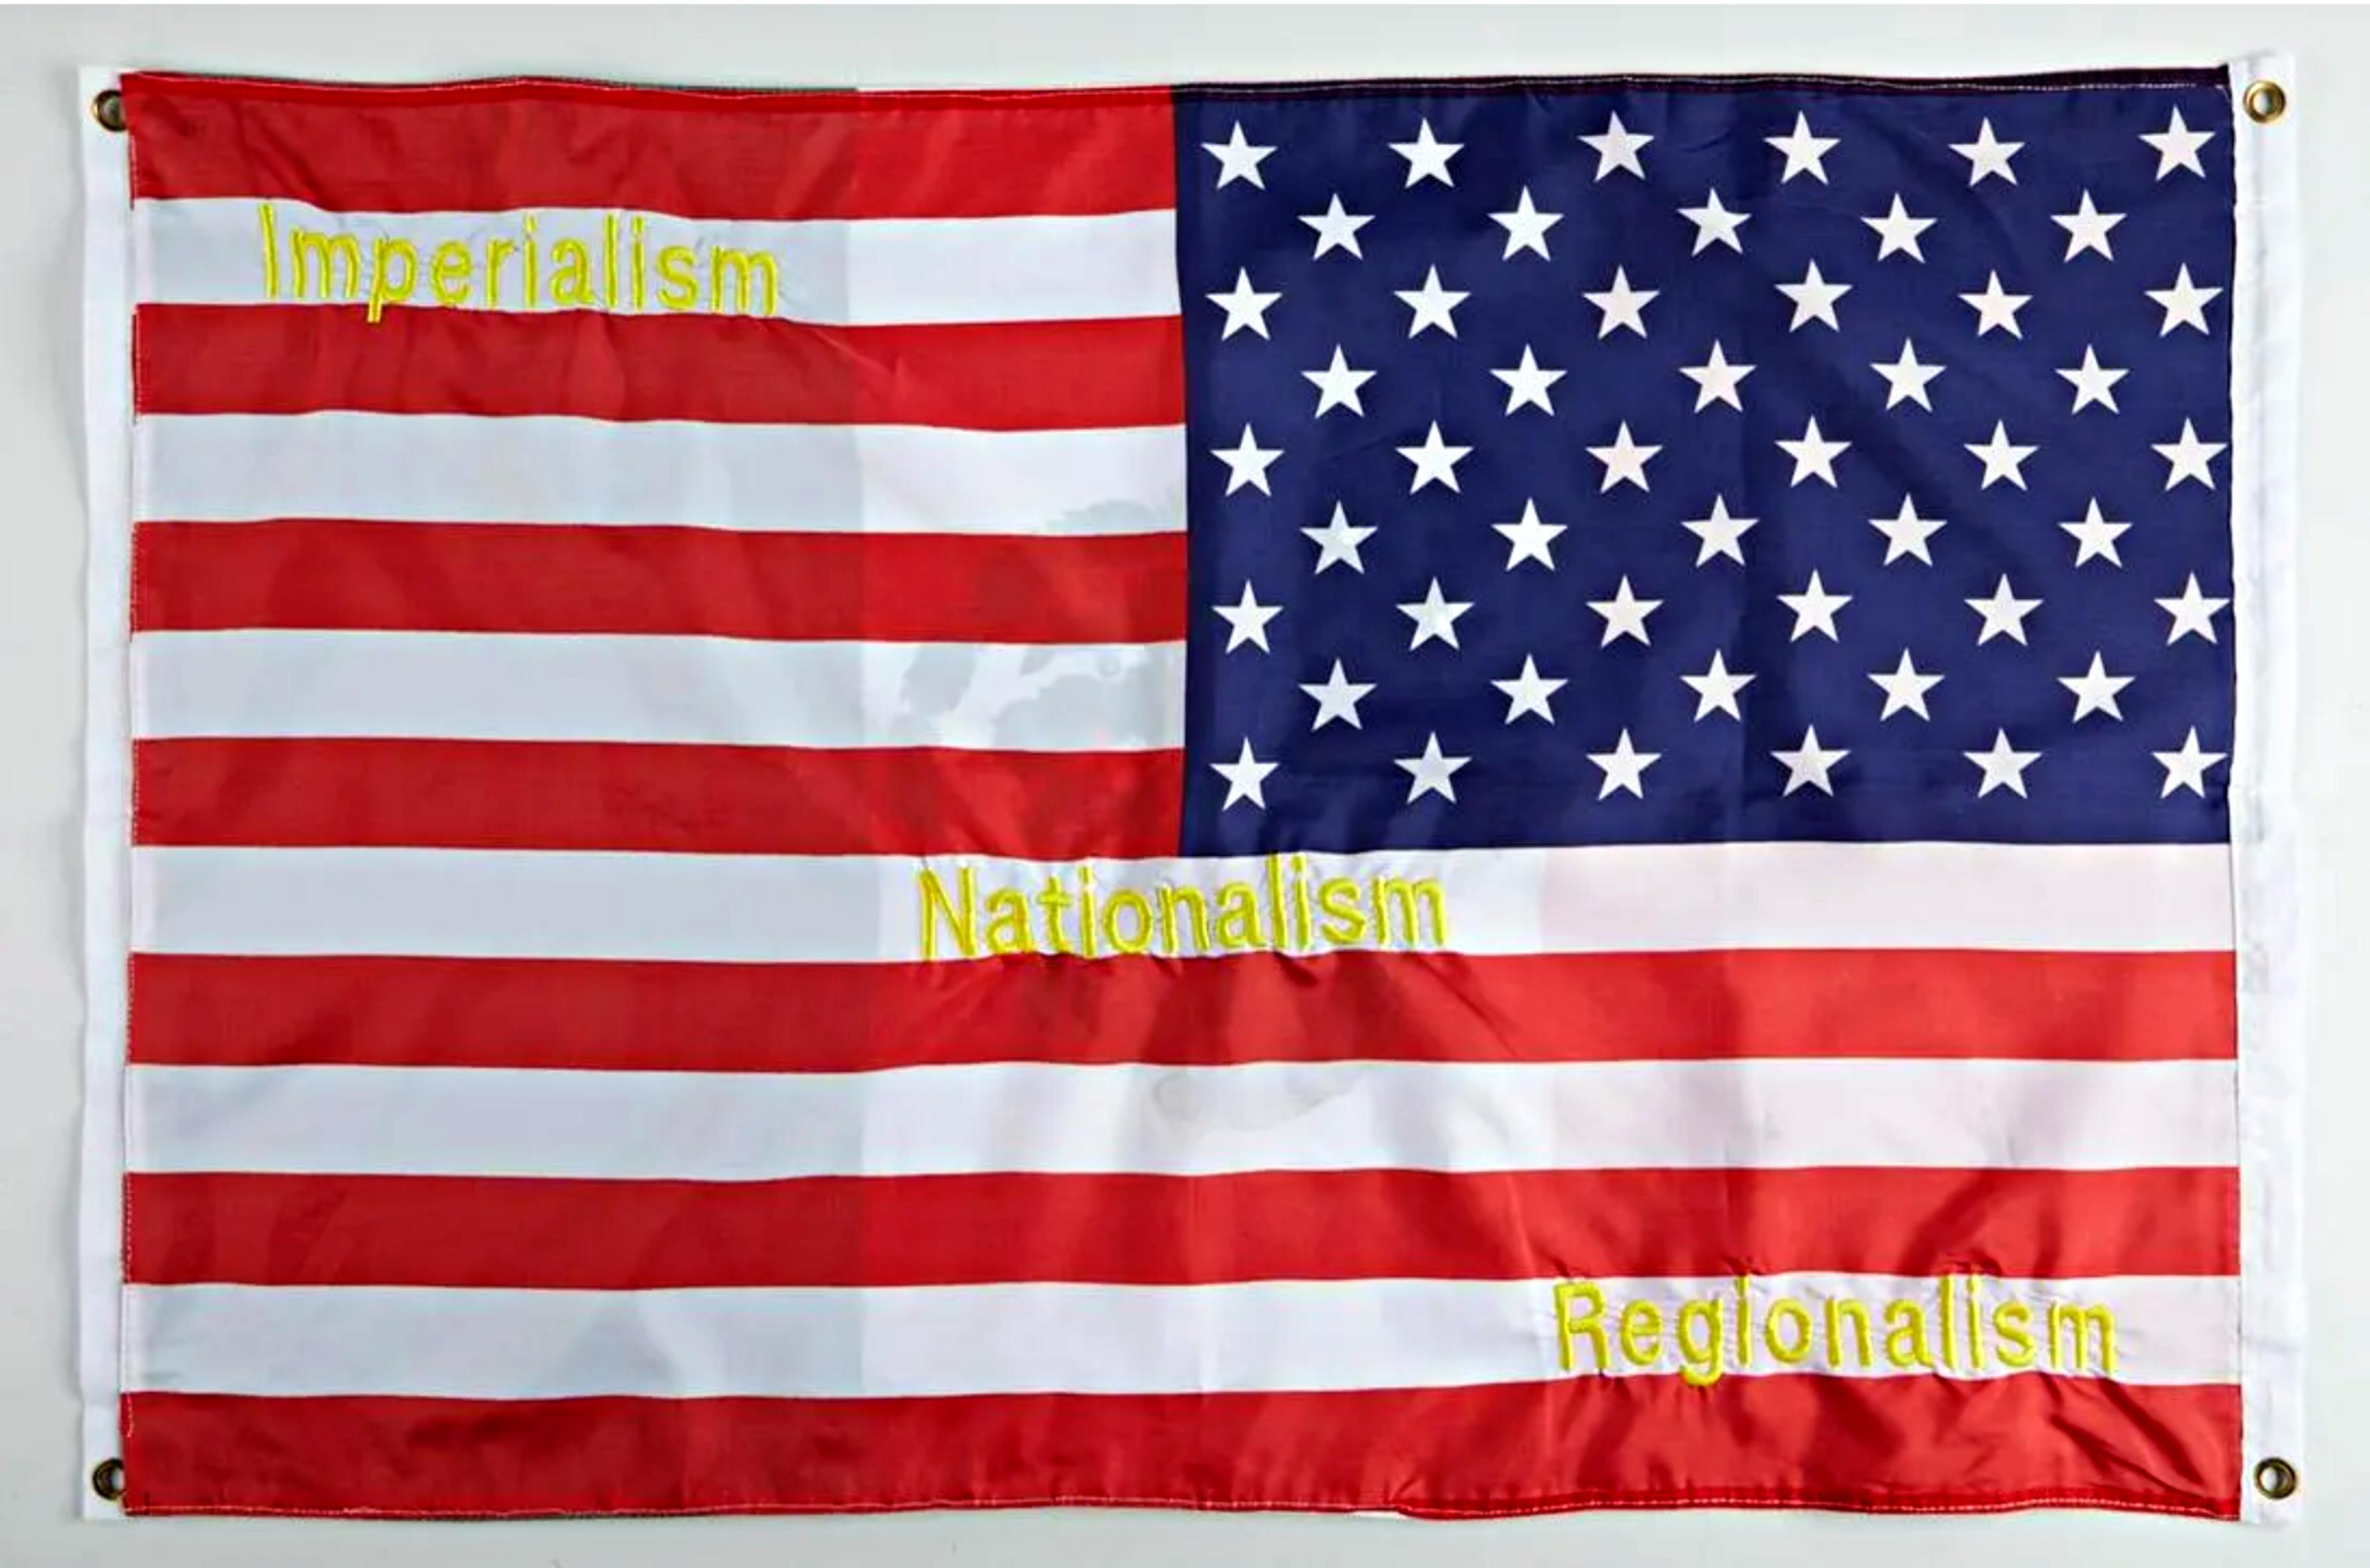 Sam Durant
The Other Side/El Otro Lado (Regionalism, Nationalism, Imperialism), 2005
United States and Mexican flags with embroidery
Stamp numbered 70 from the edition of 100
24 × 37 inches
Unframed 
This double sided flag art was commissioned by